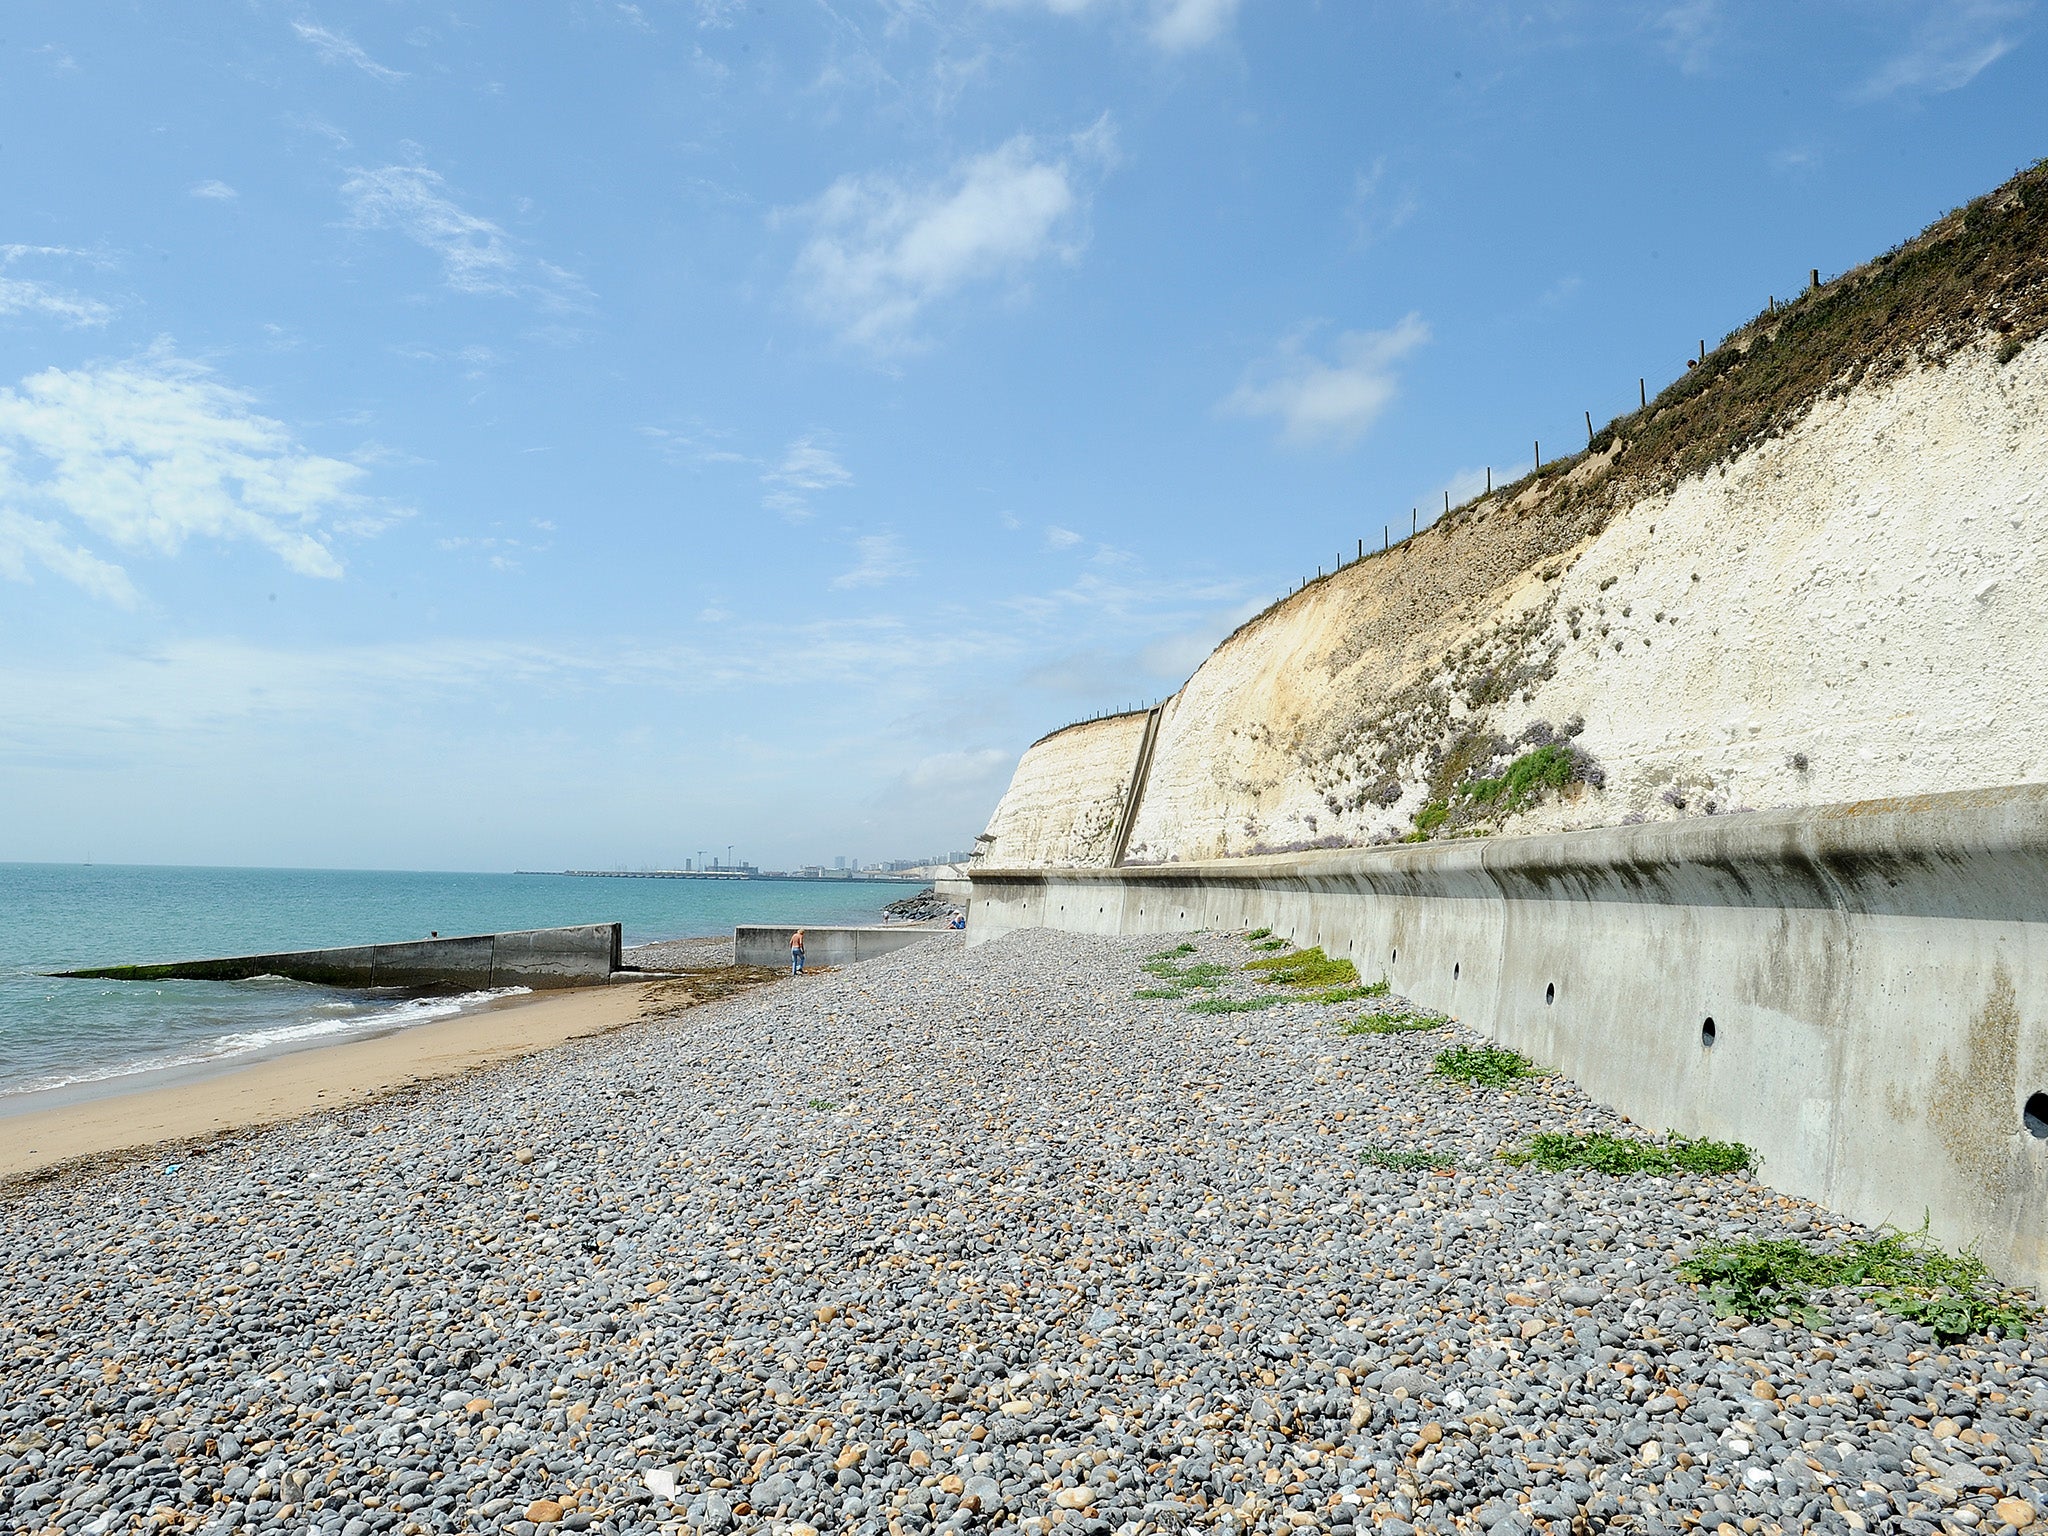 The boy fell from a cliff in the small village of Ovingdean, near Brighton